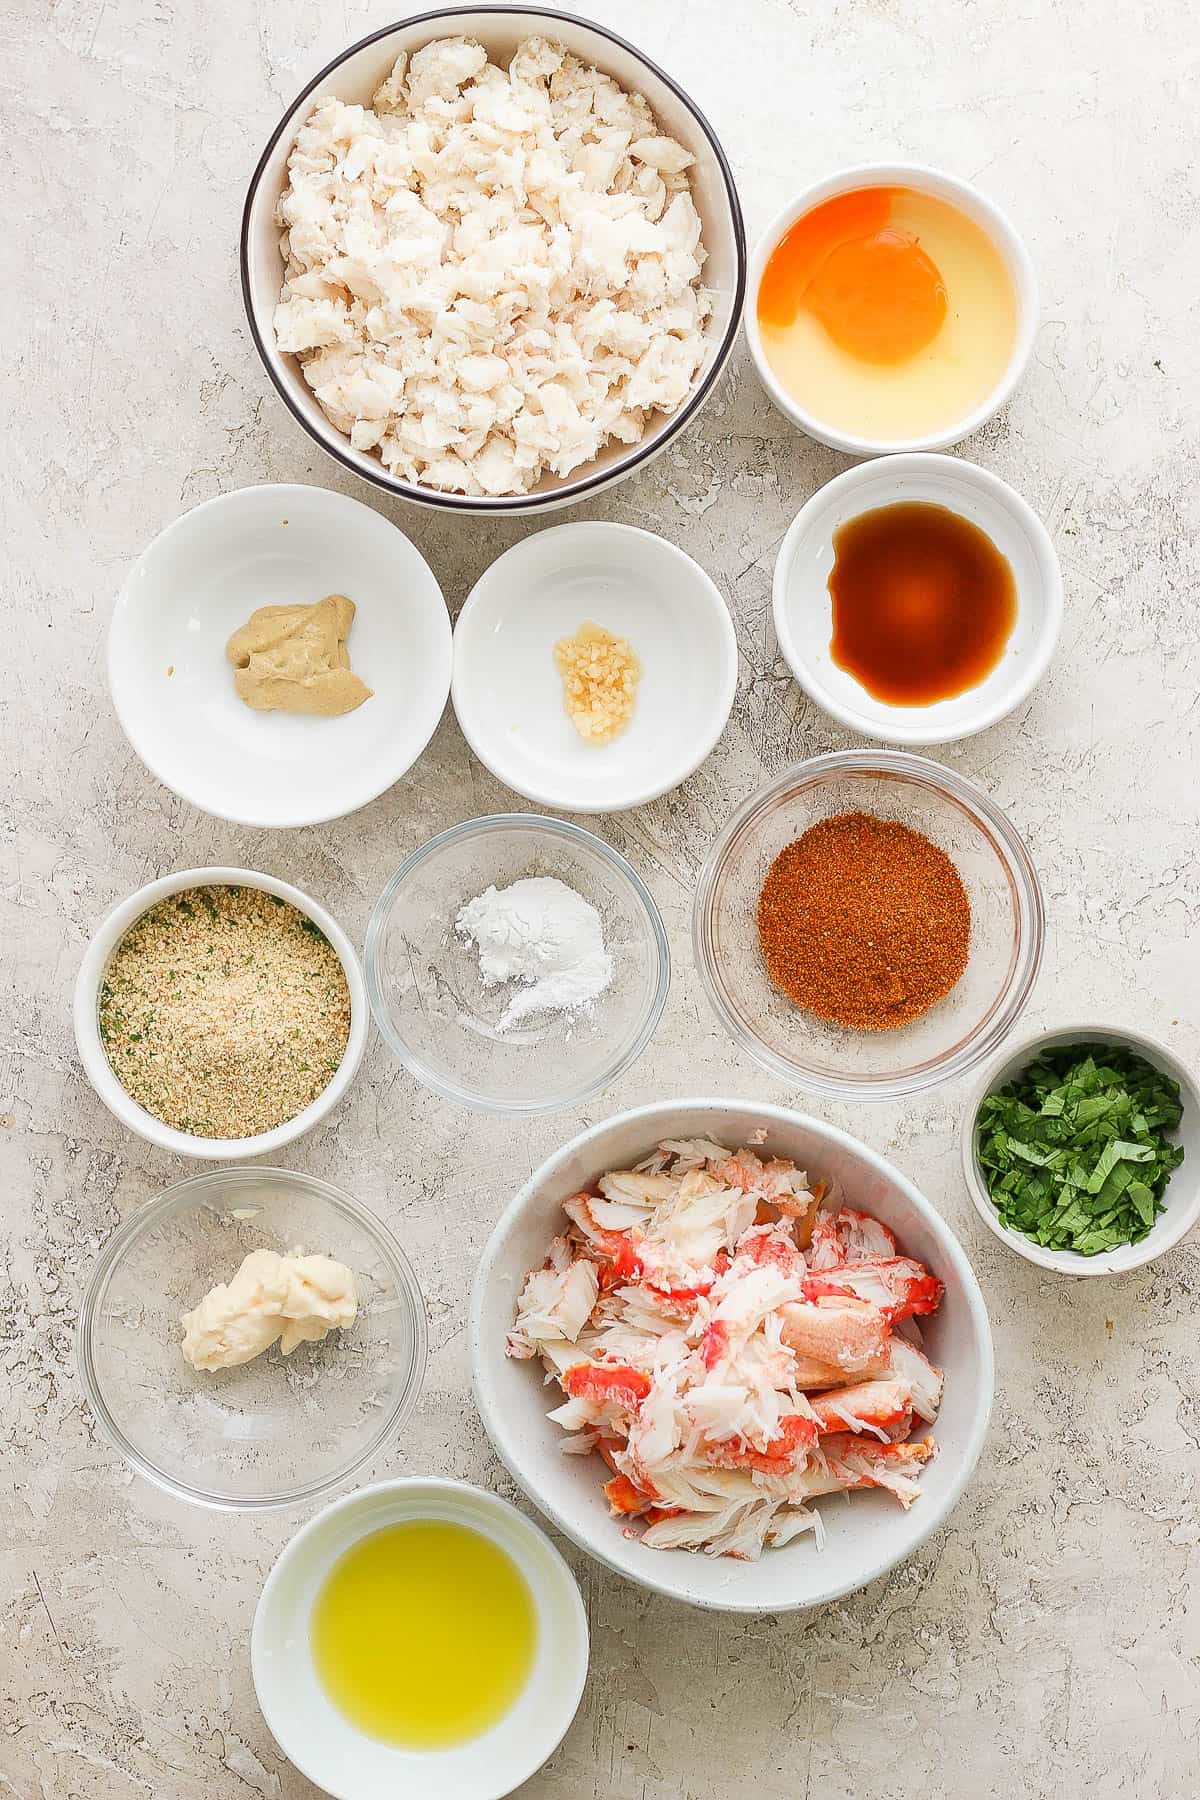 Ingredients for crab cakes in separate bowls.